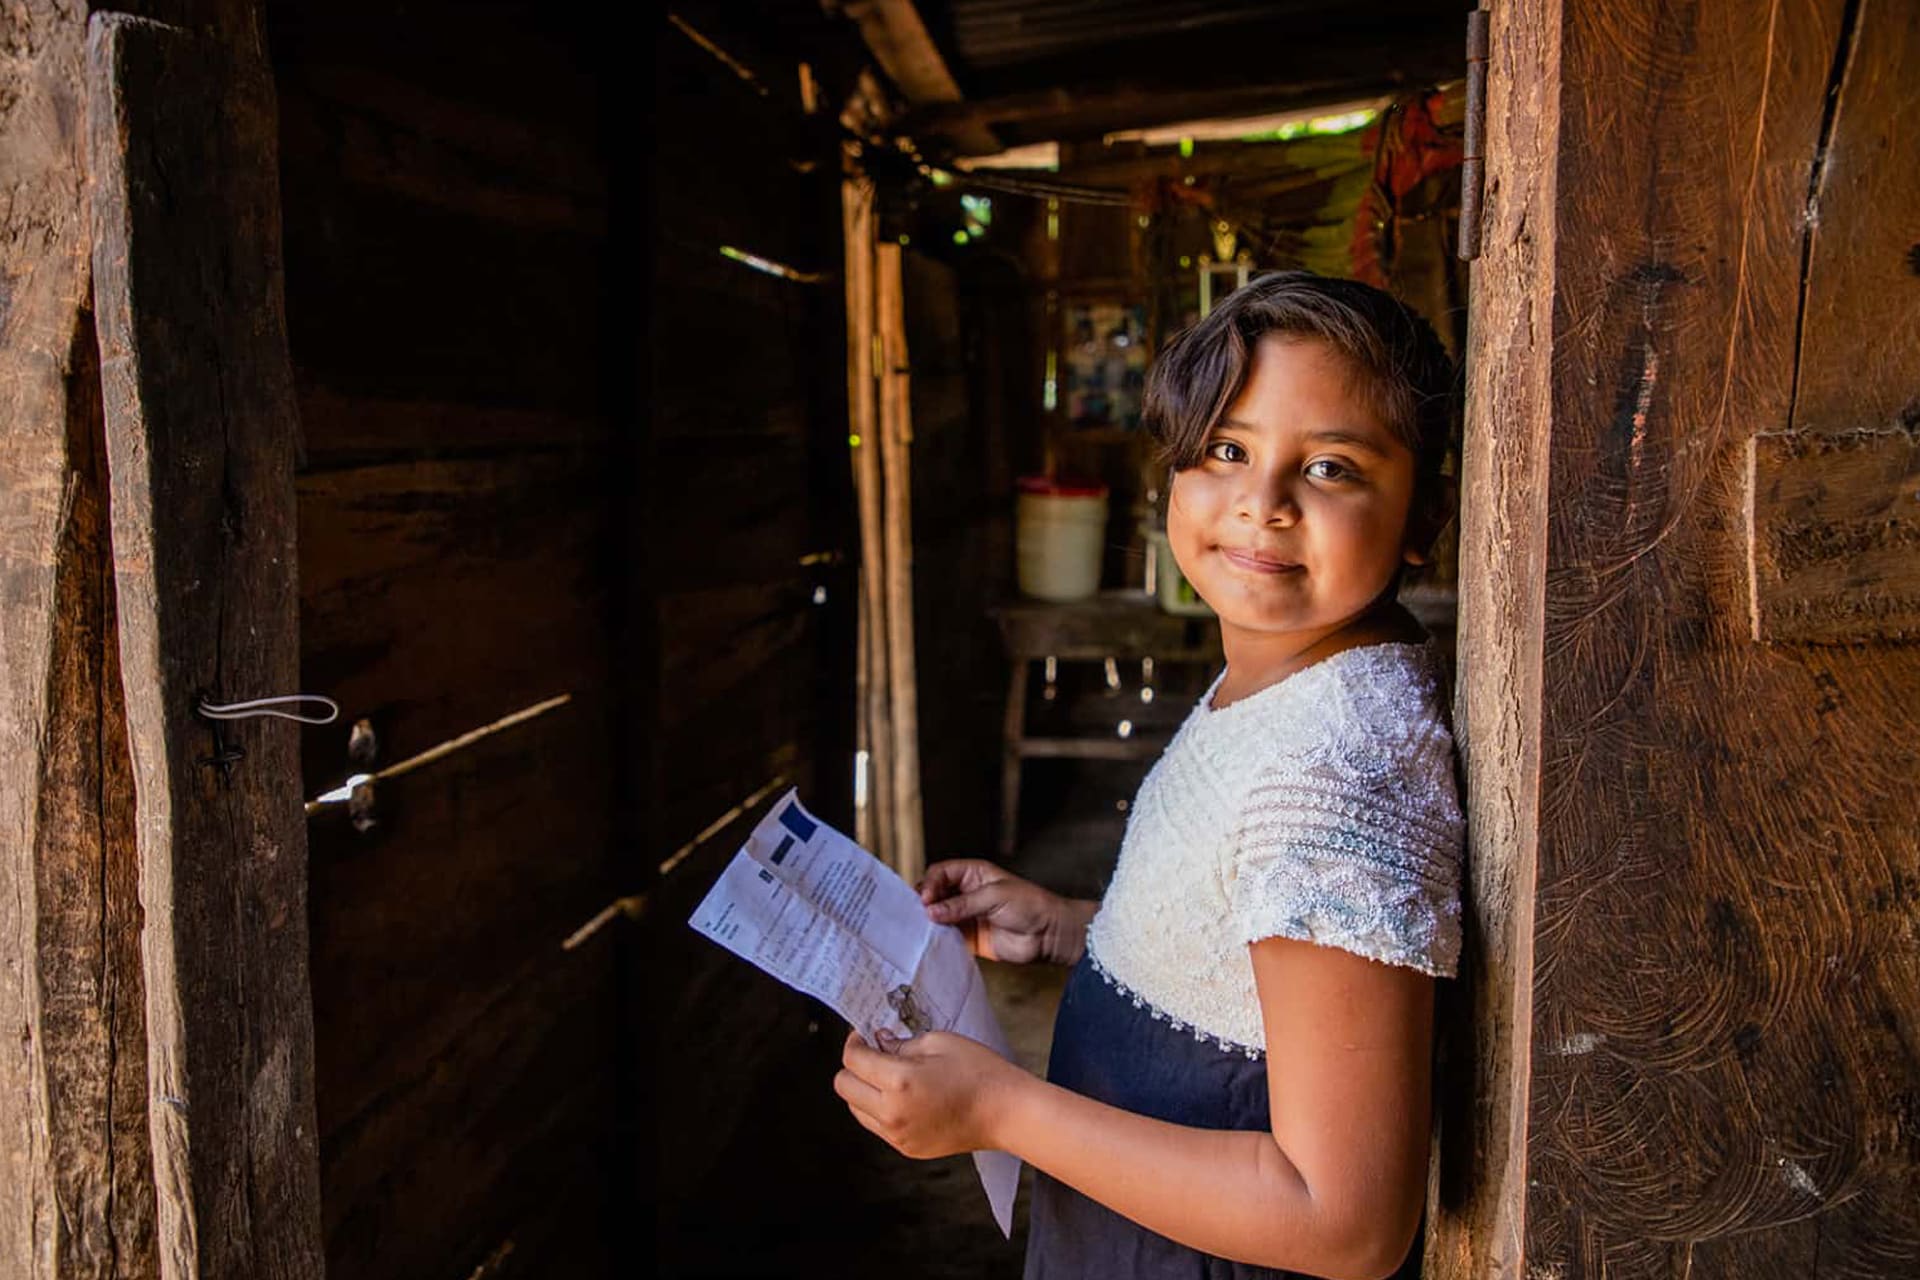 Little girl from Central America leans against a doorway smiling and holding a letter. She is wearing a blue and white shirt.